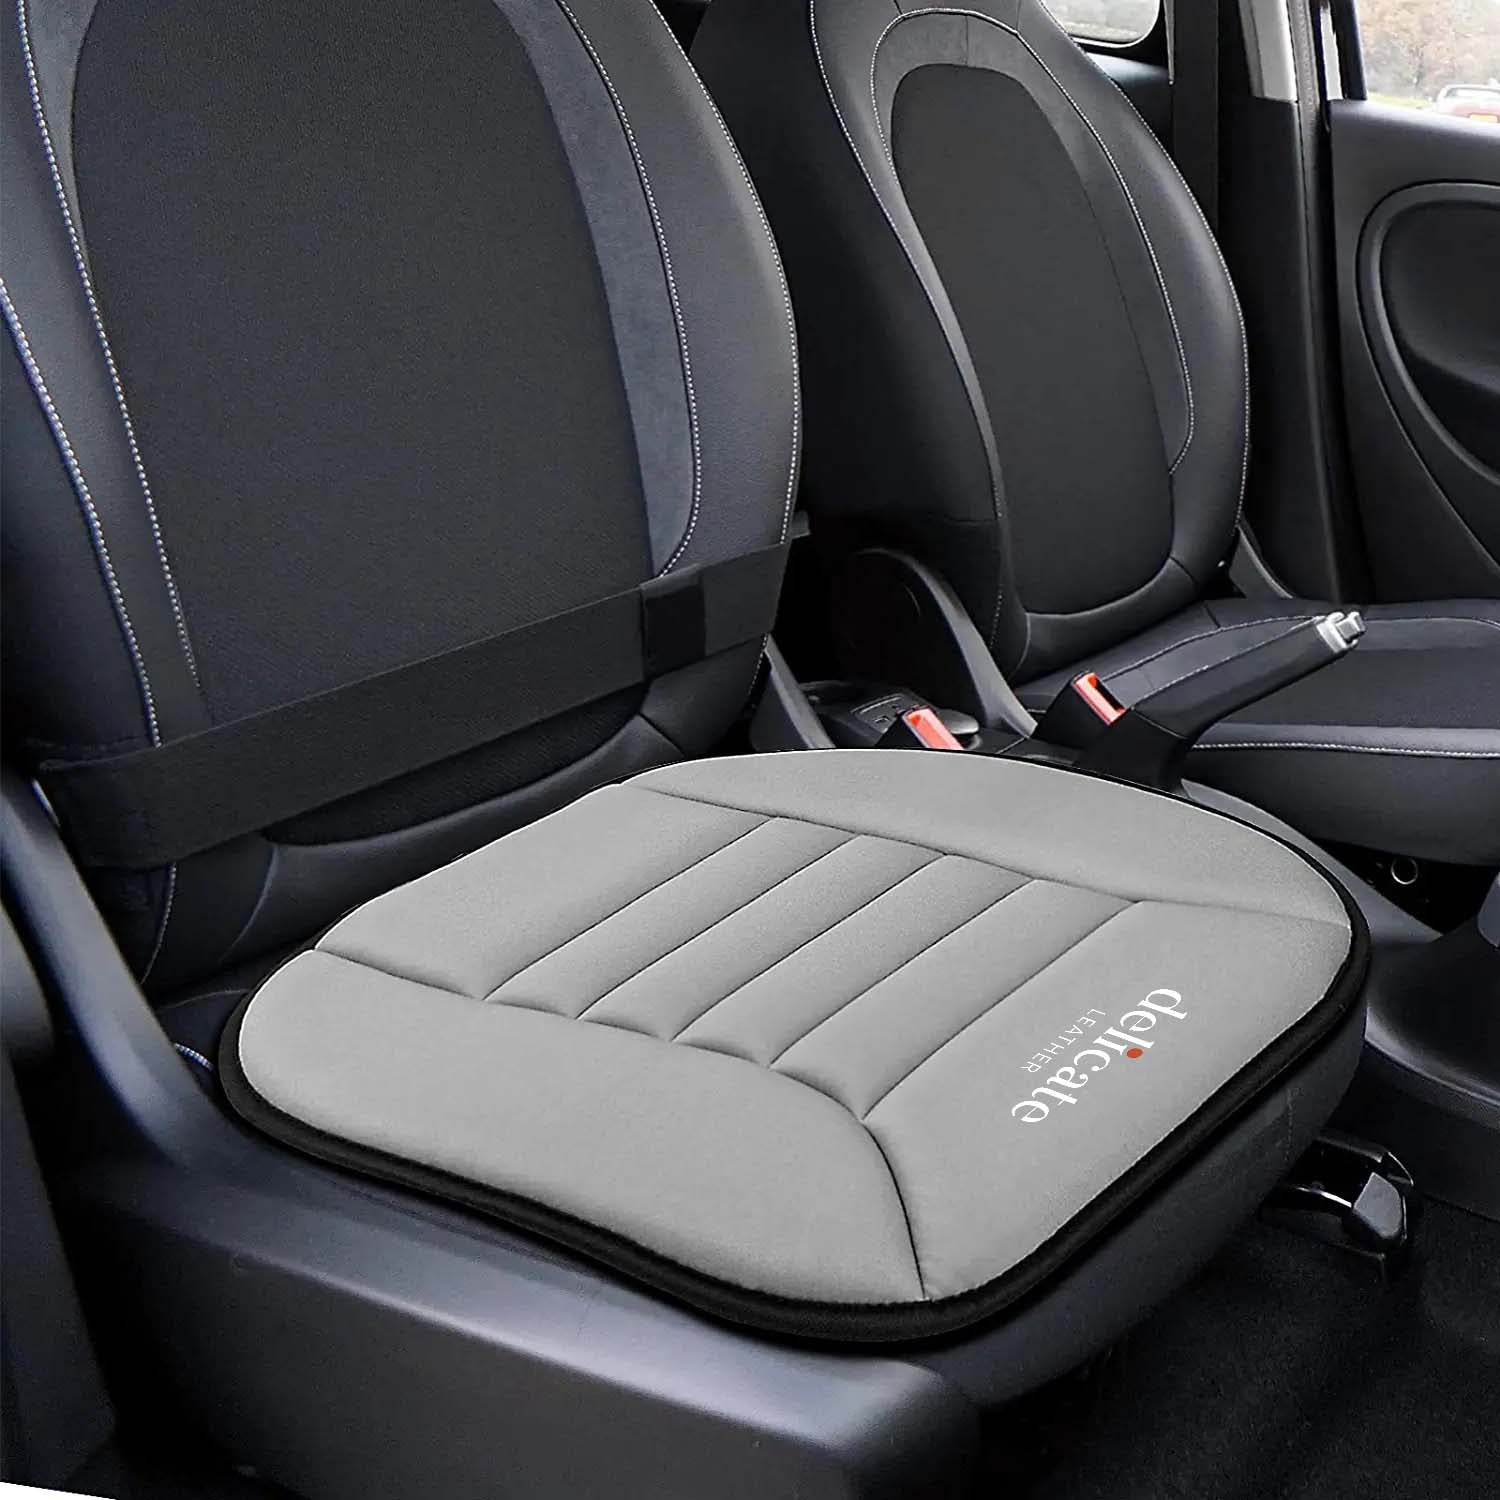 Hyundai Car Seat Cushion: Enhance Comfort and Support for Your Drive